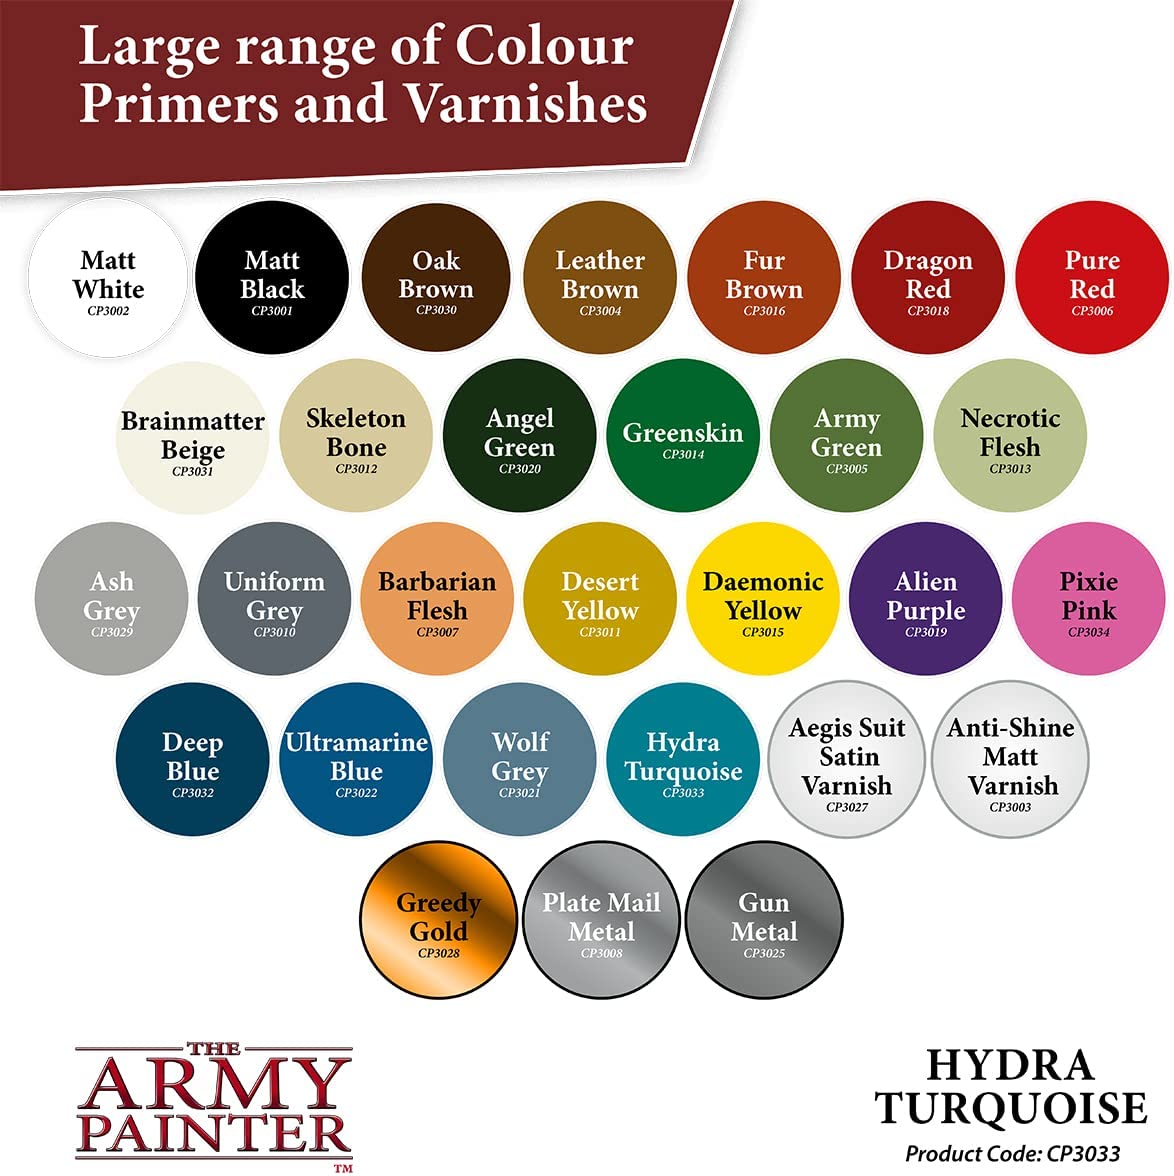 The Army Painter - Colour Primer: Hydra Turquoise (400ml/13.5oz)